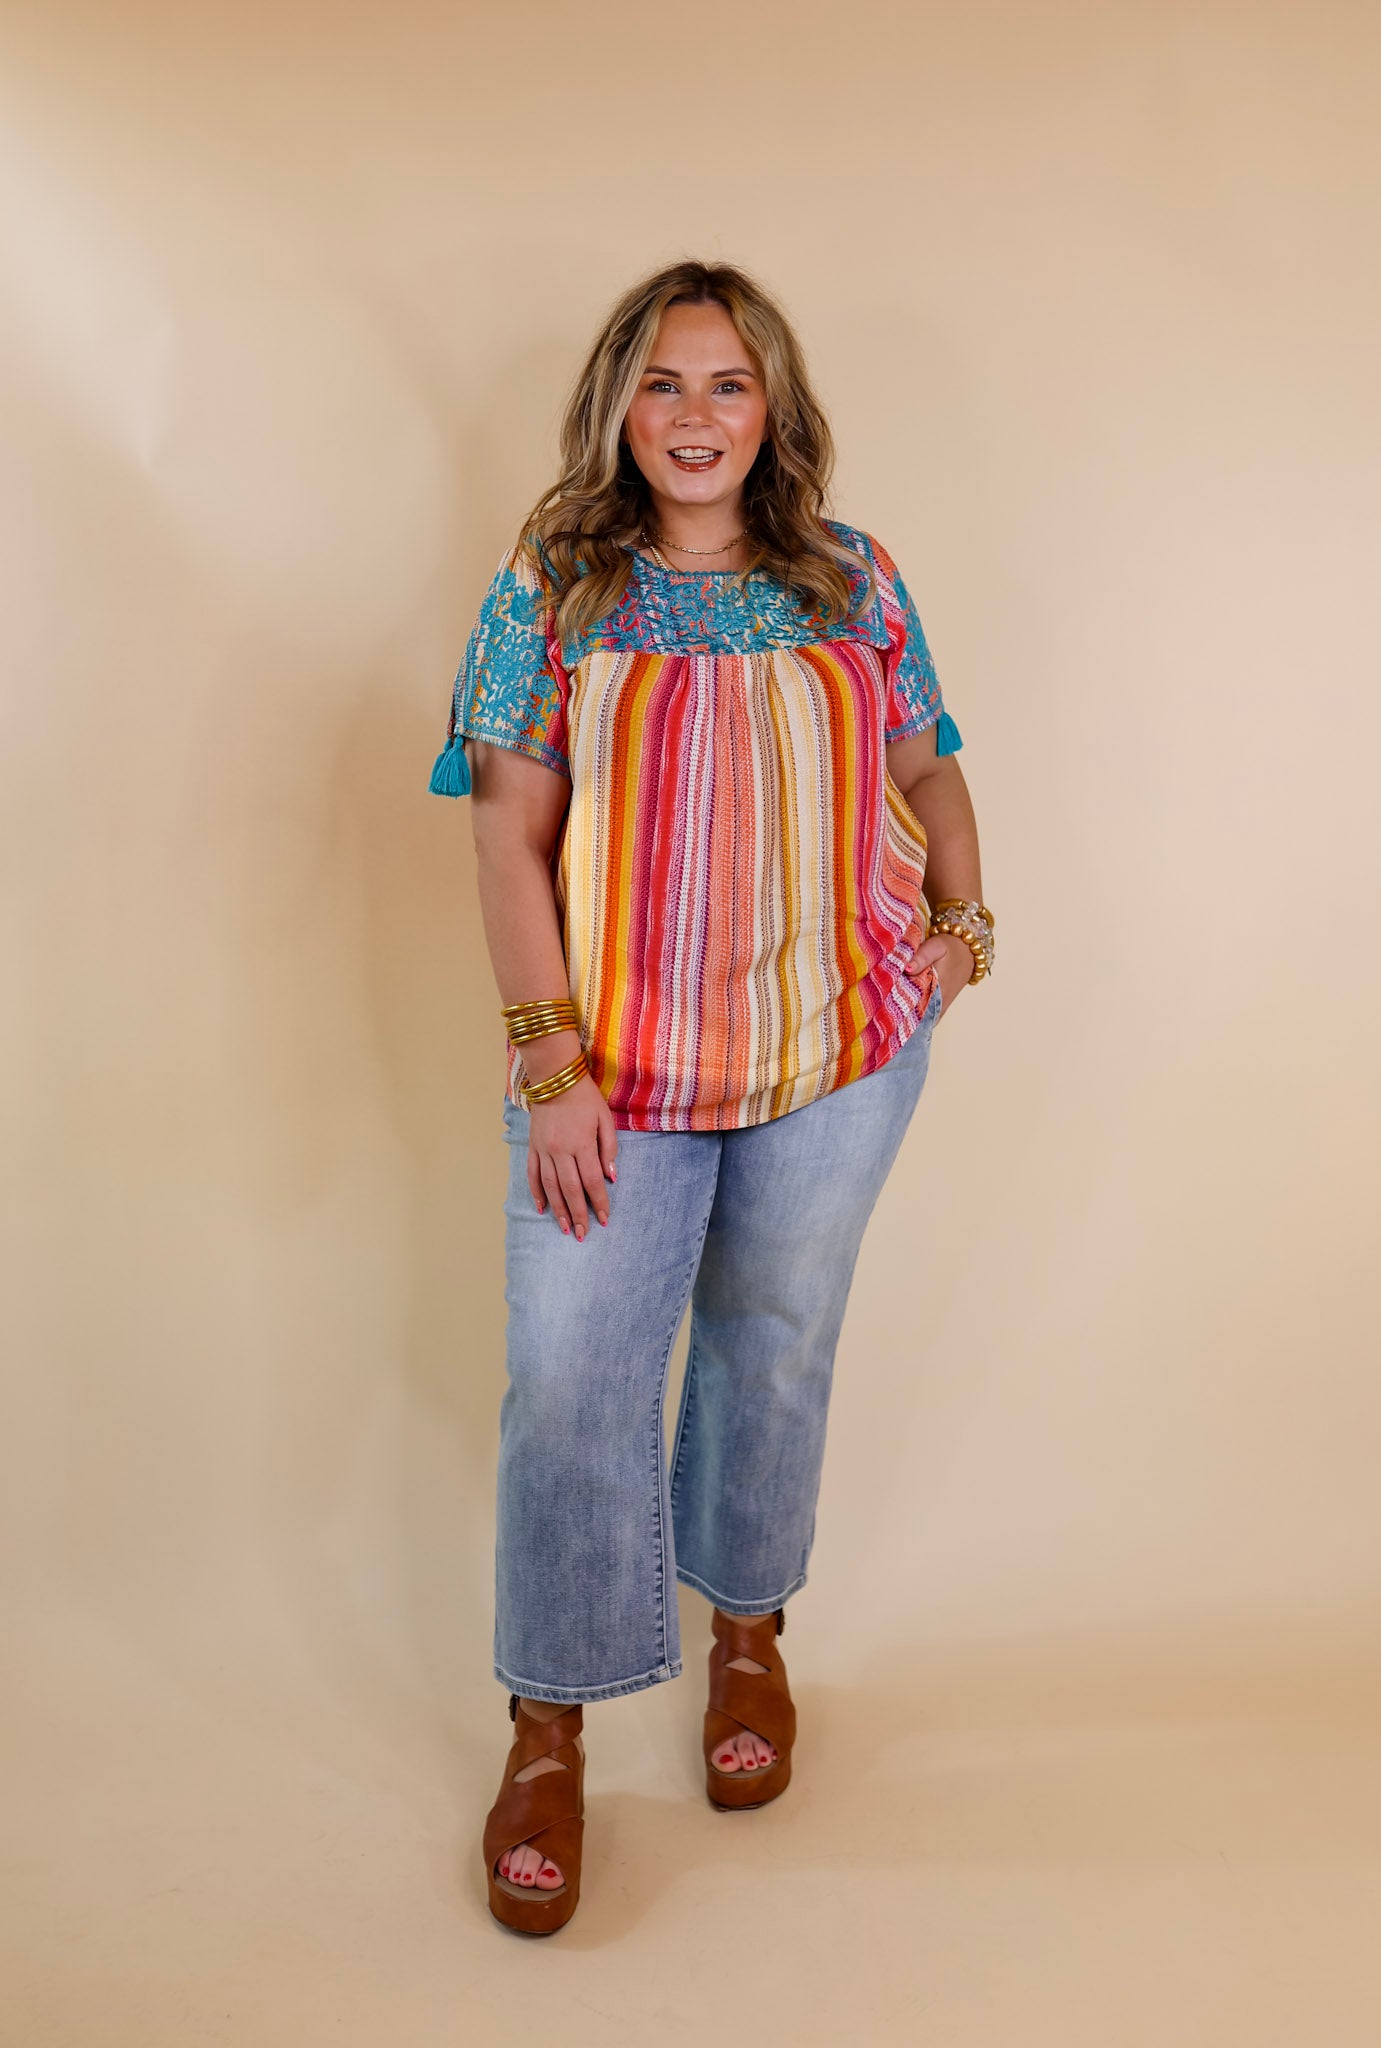 Sweet And Charming Serape Print Top with Blue Floral Embroidery - Giddy Up Glamour Boutique